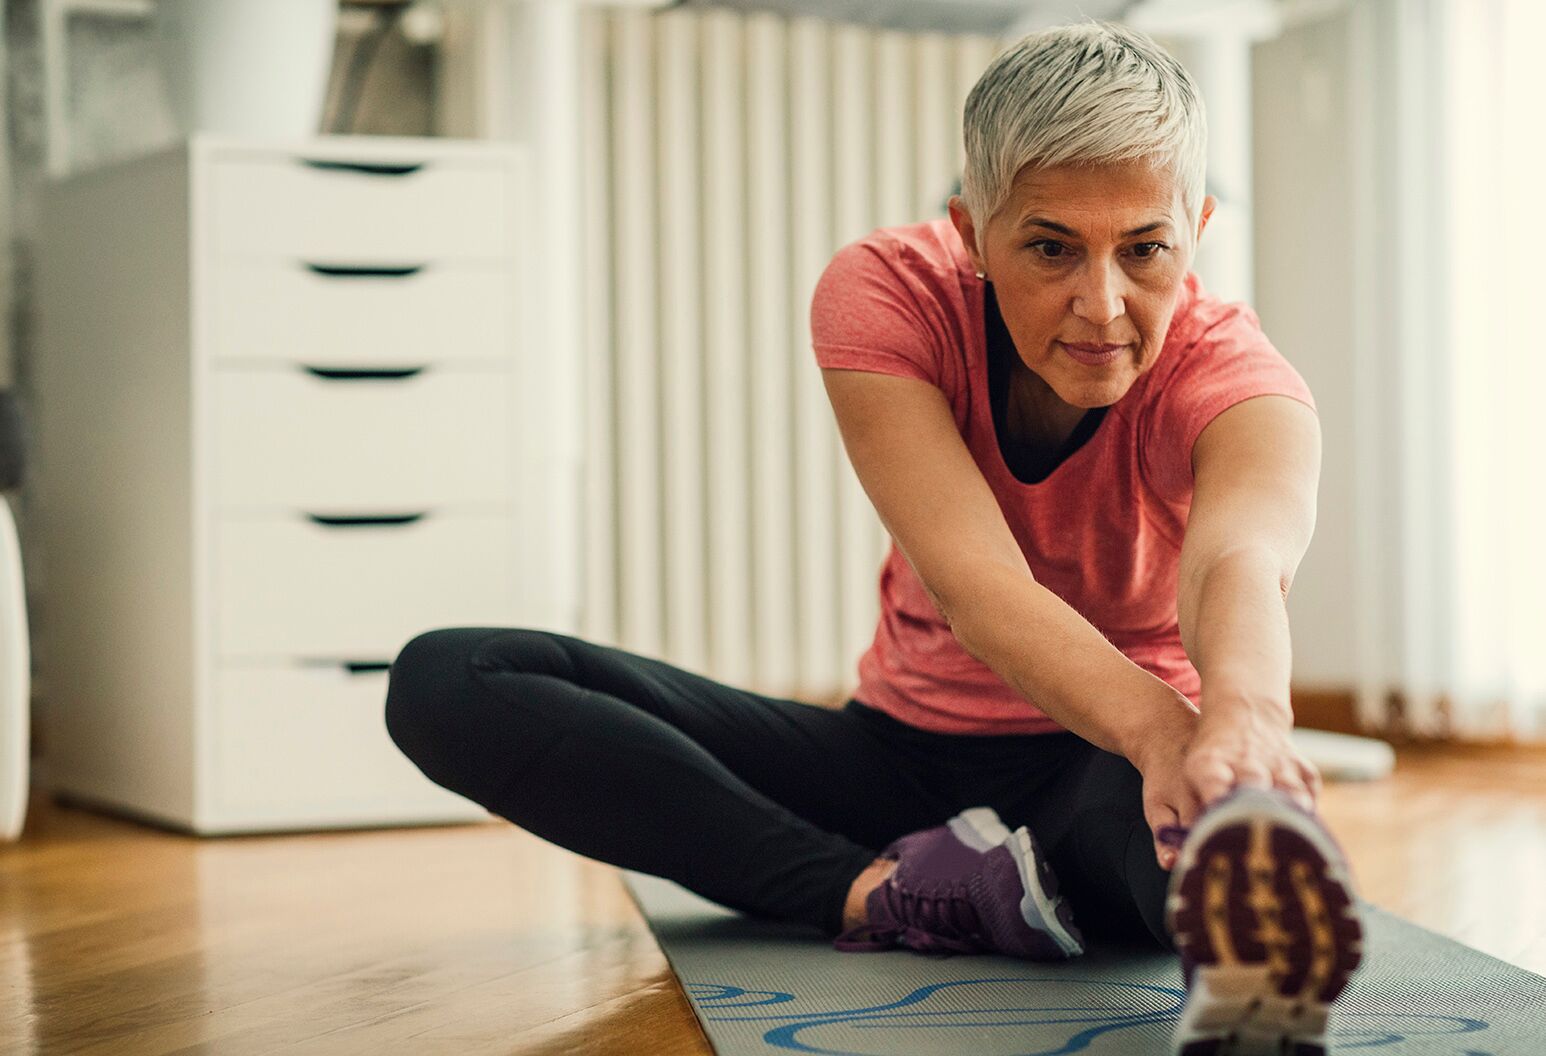 Home exercises to do at home for older adults - Sundial Clinics